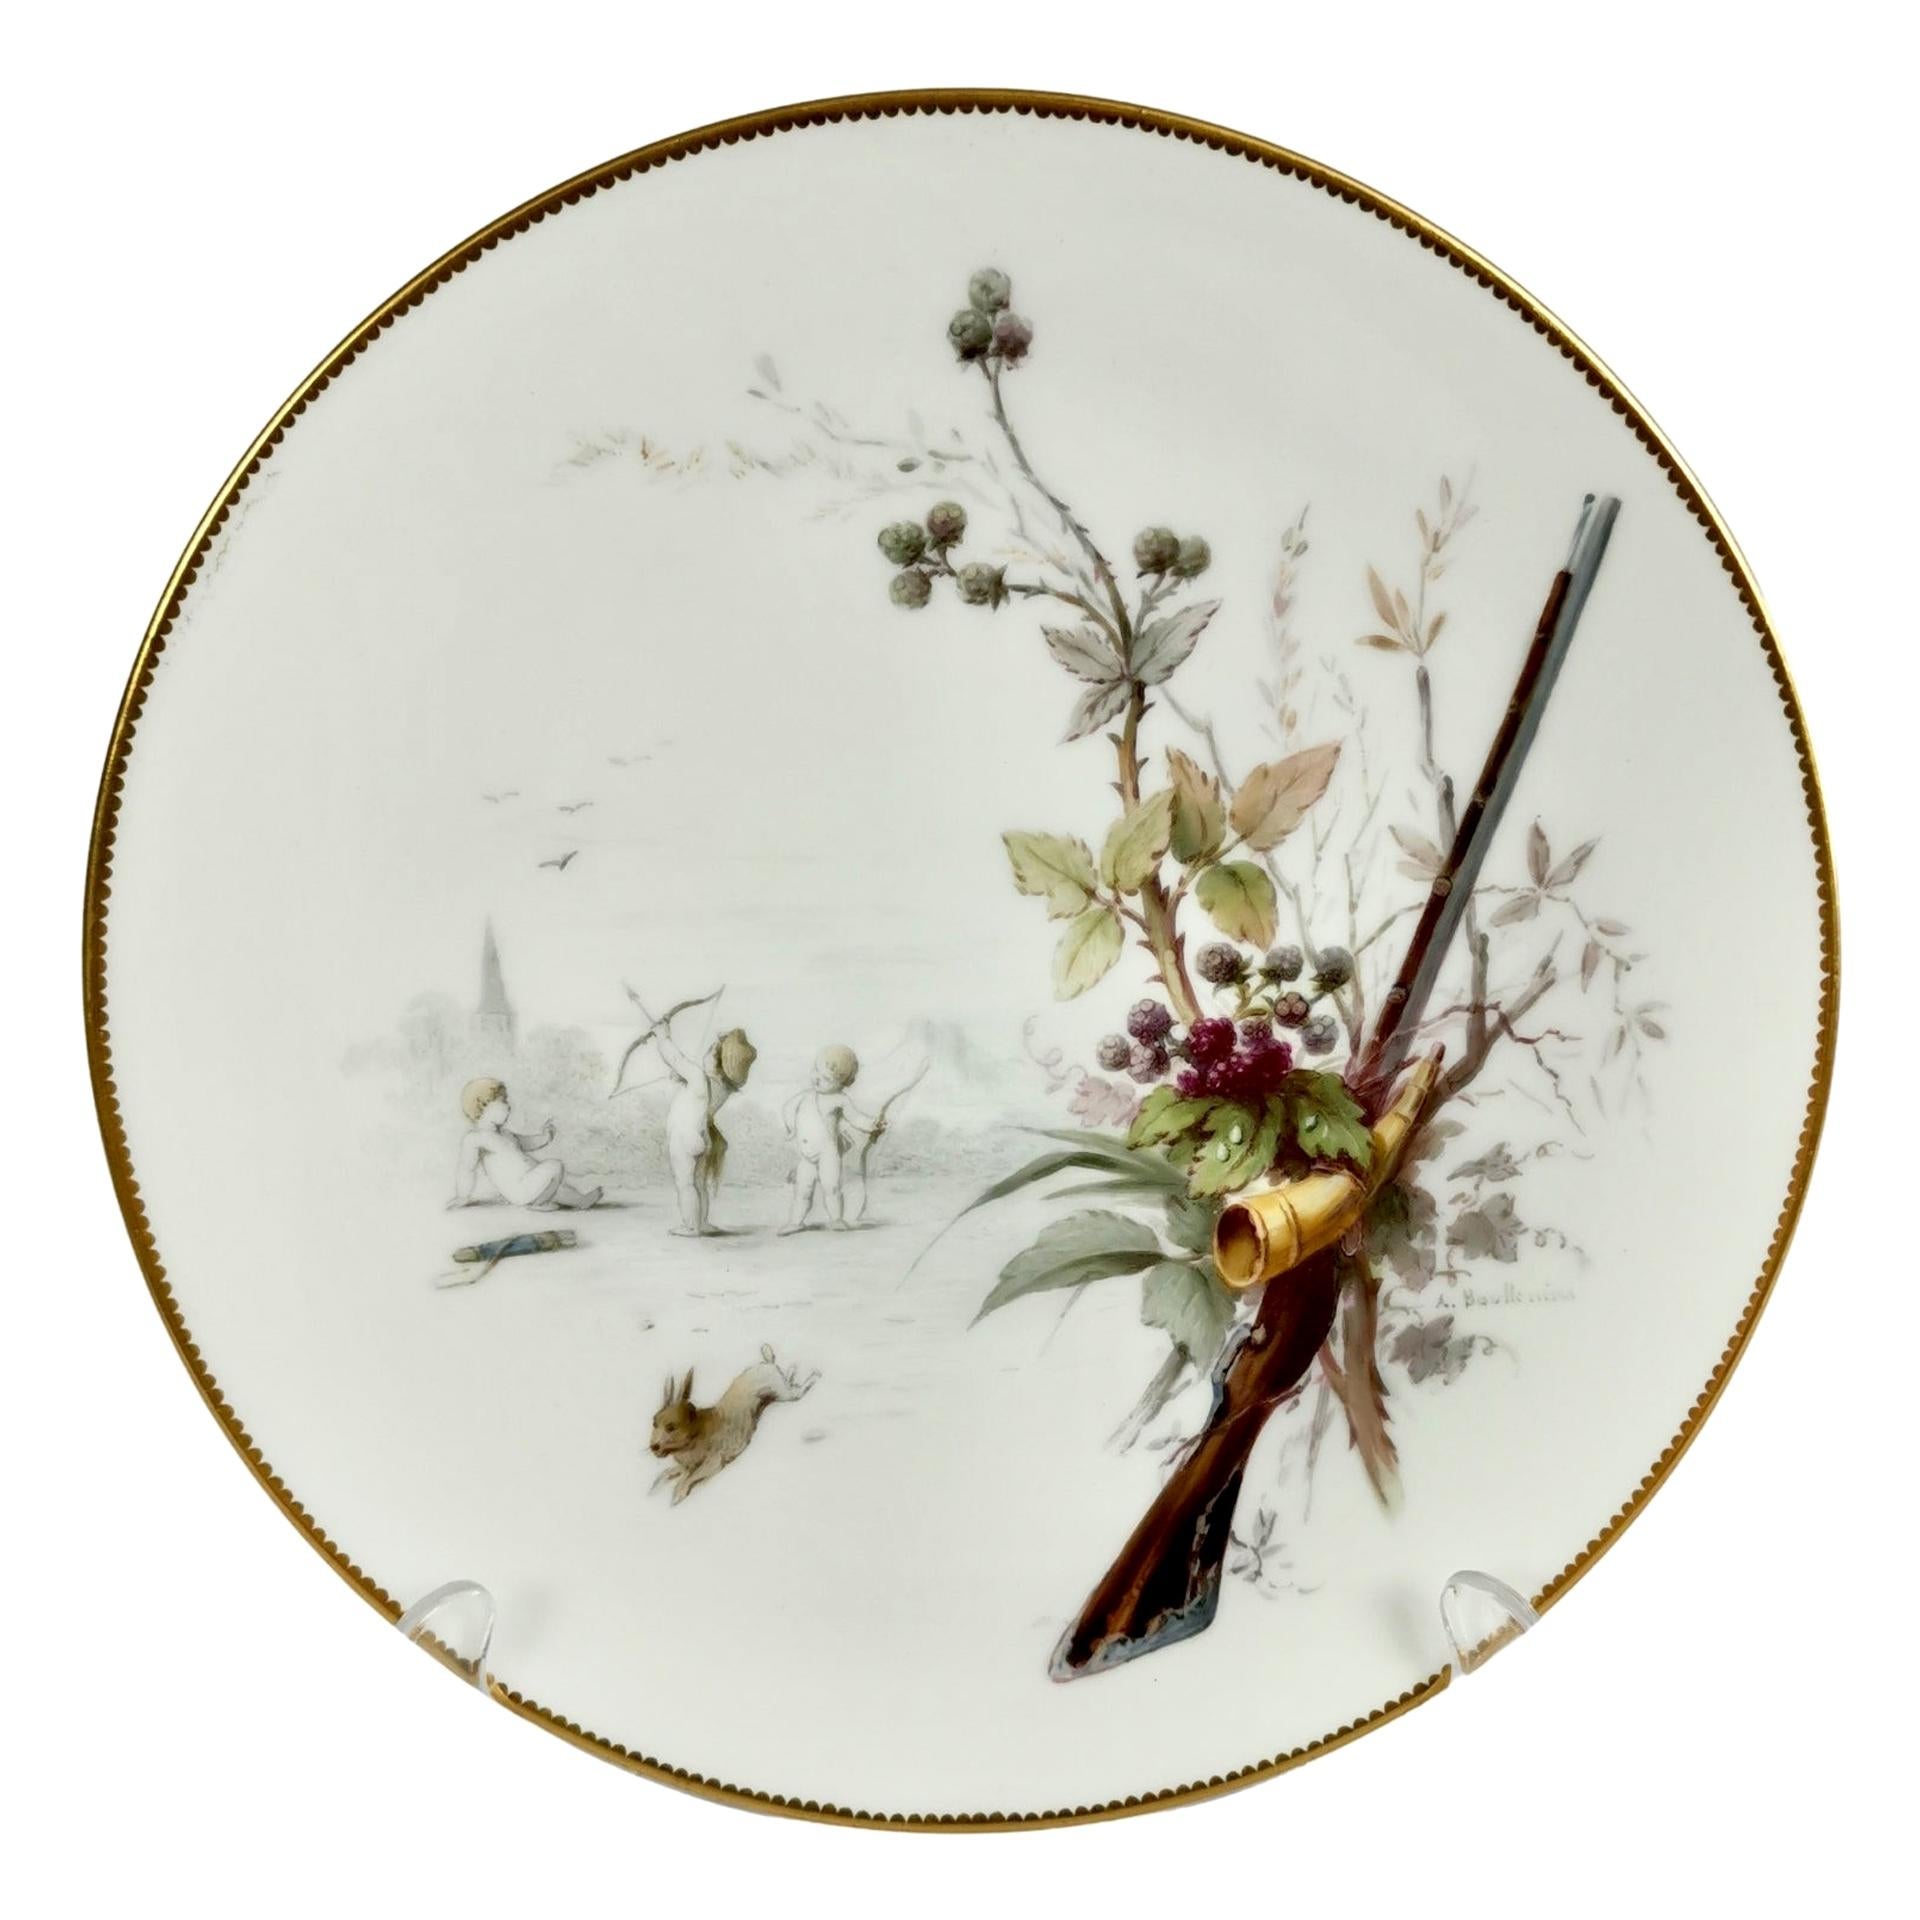 Minton Porcelain Plate, Putti and Rabbit Scene by A. Boullemier, circa 1885 For Sale